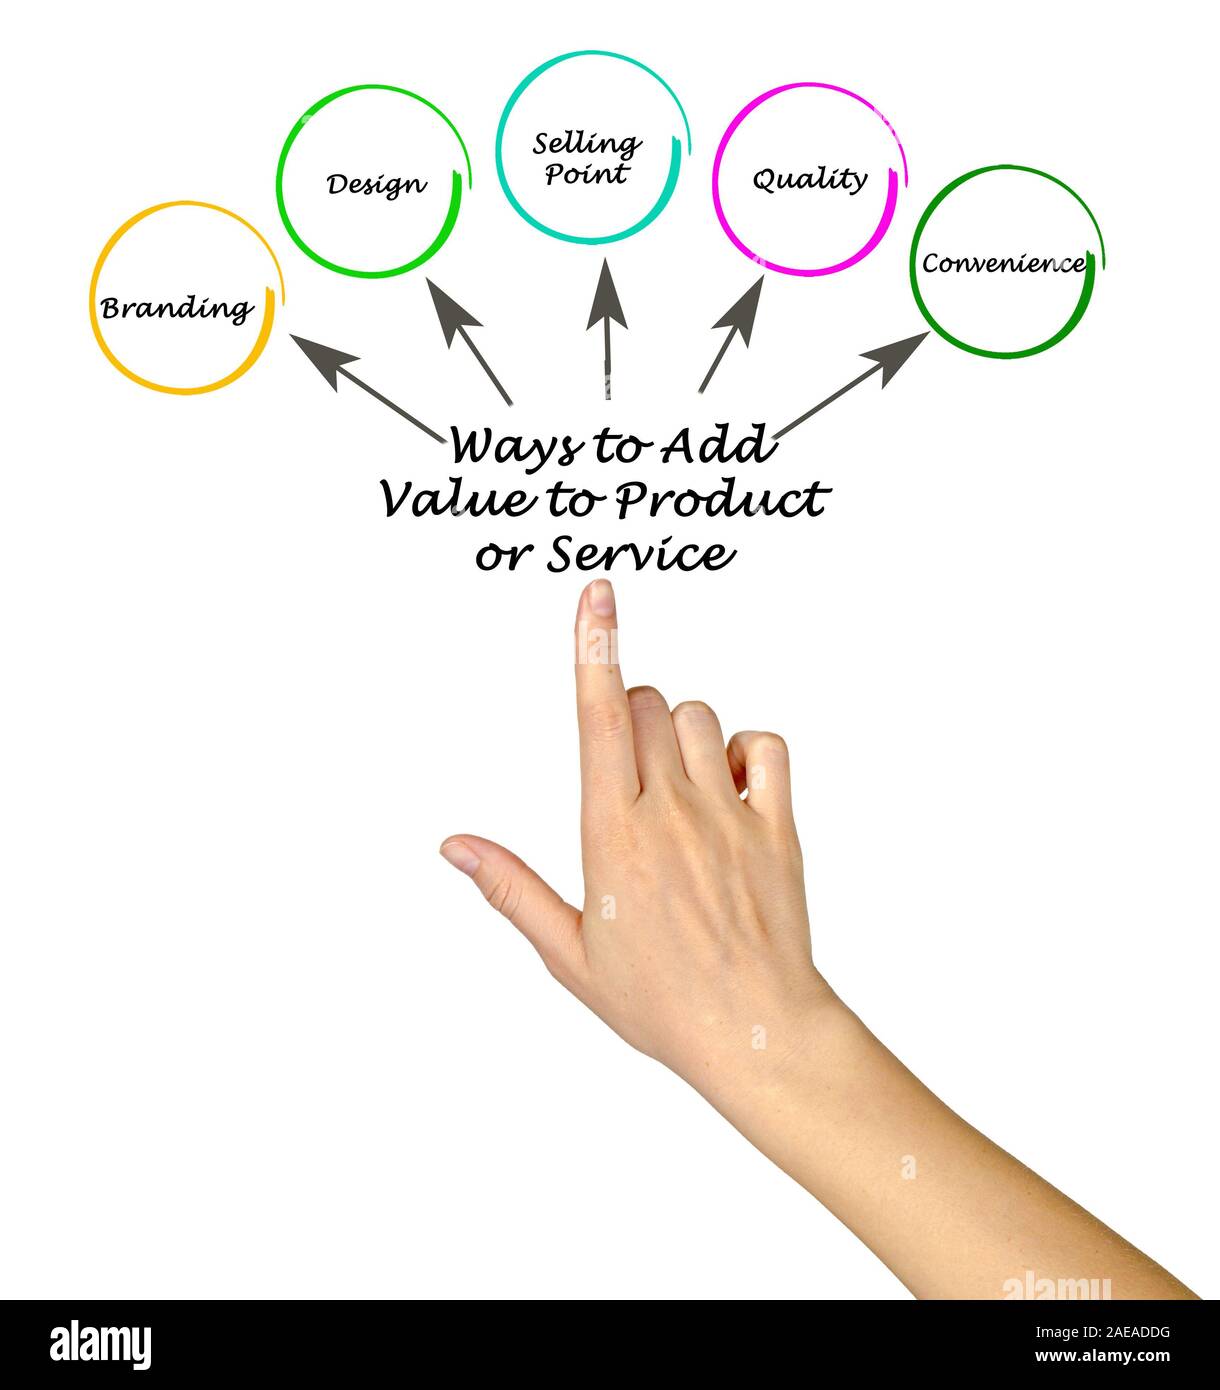 Being added value. Product or service. Unique selling point. Value added services.